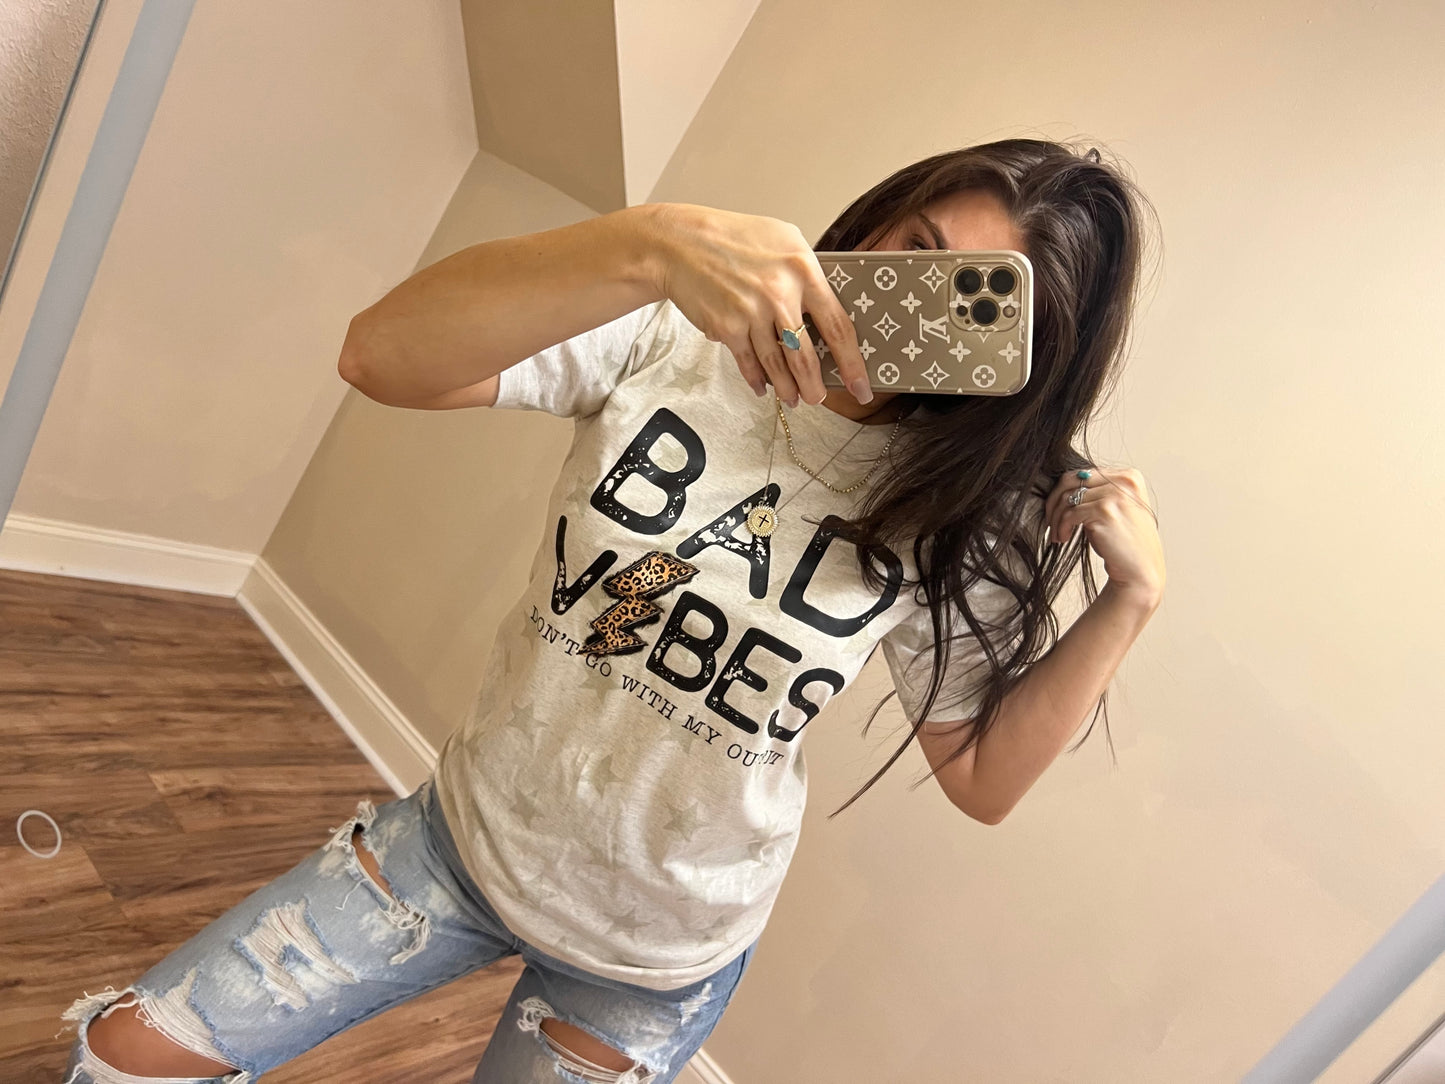 Bad vibes don’t go with my outfit oatmeal star tee - $20 Tuesday NO COUPON CODES ALLOWED